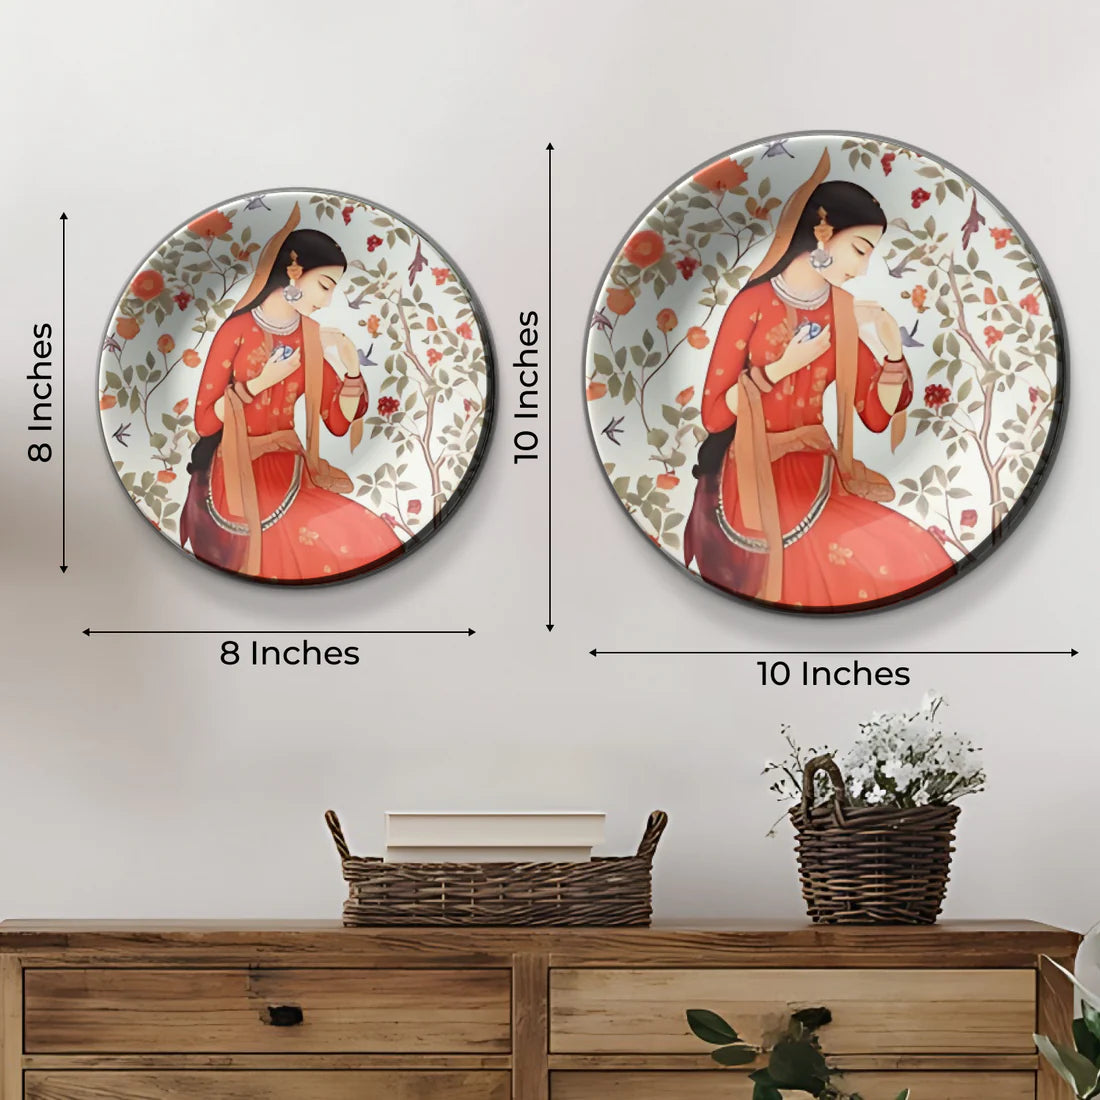 Set of 3 Assorted Nature and Culture Wall Plates Décor